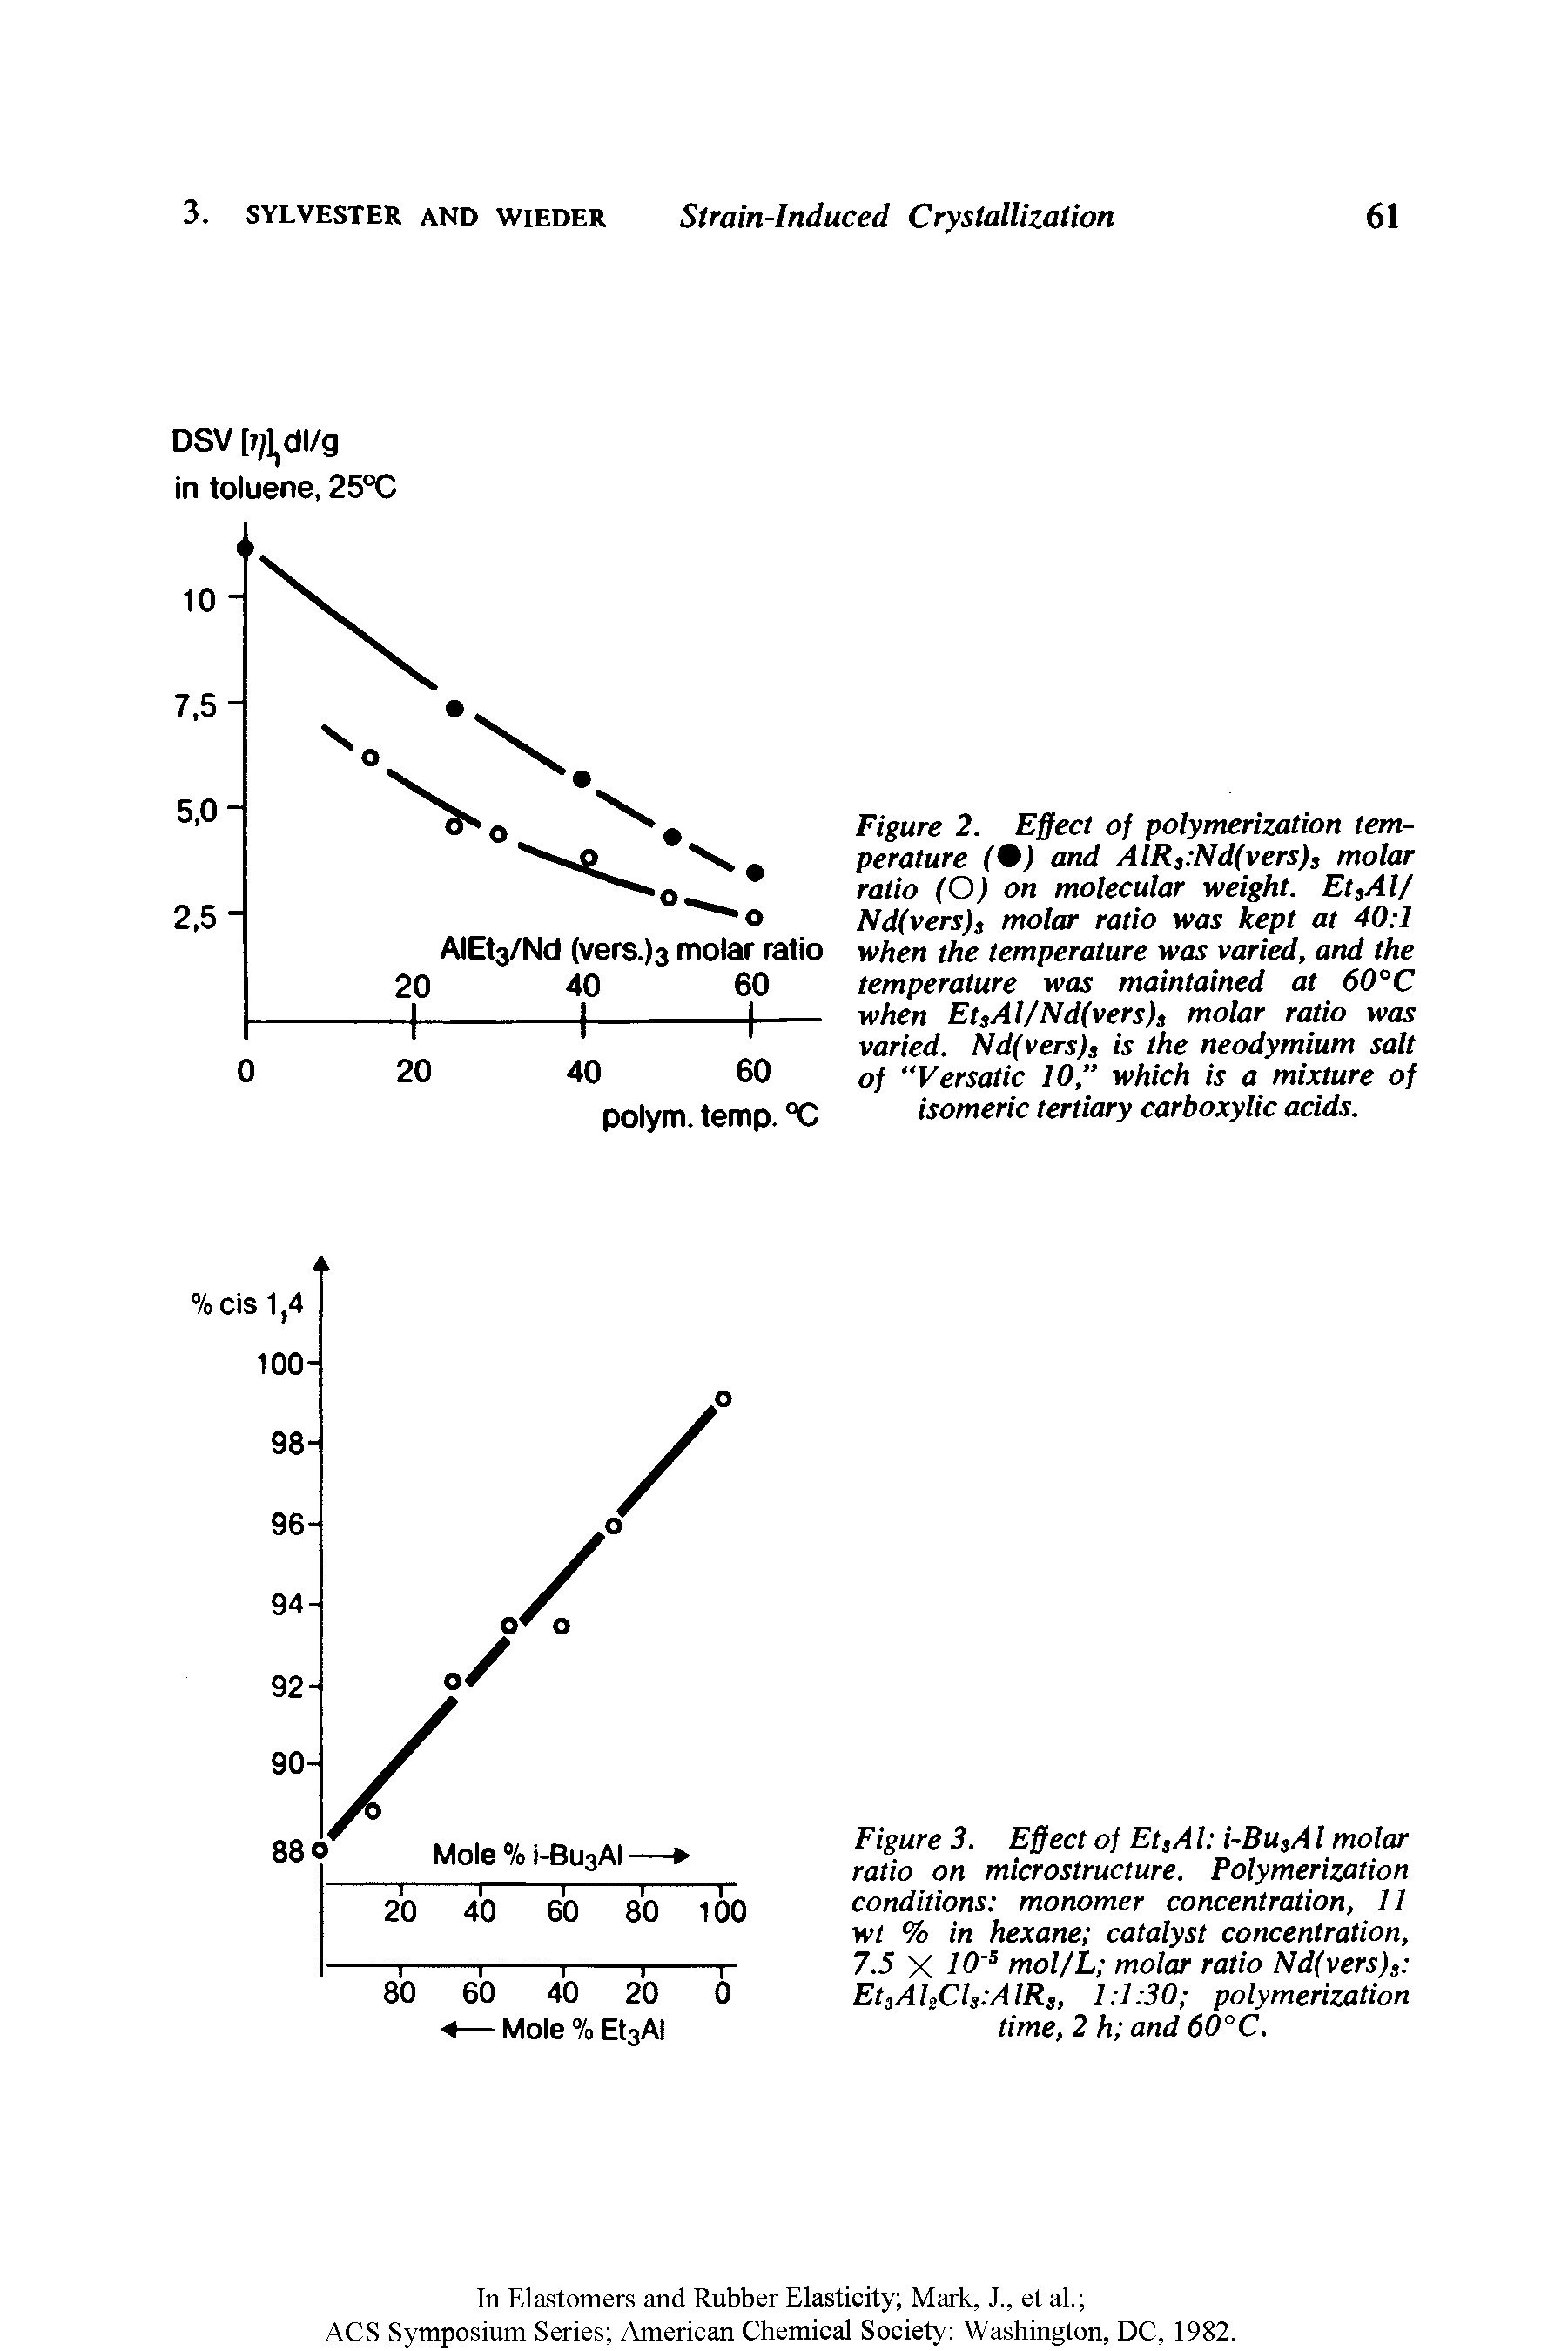 Figure 3. Effect of EtsA l i-BusA l molar ratio on microstructure. Polymerization conditions monomer concentration, 11 wt % in hexane catalyst concentration, 7.5 X 10 5 mol/L molar ratio Nd(vers), Et3Al2Cls AIRS, 1 1 30 polymerization time, 2 h and 60°C.